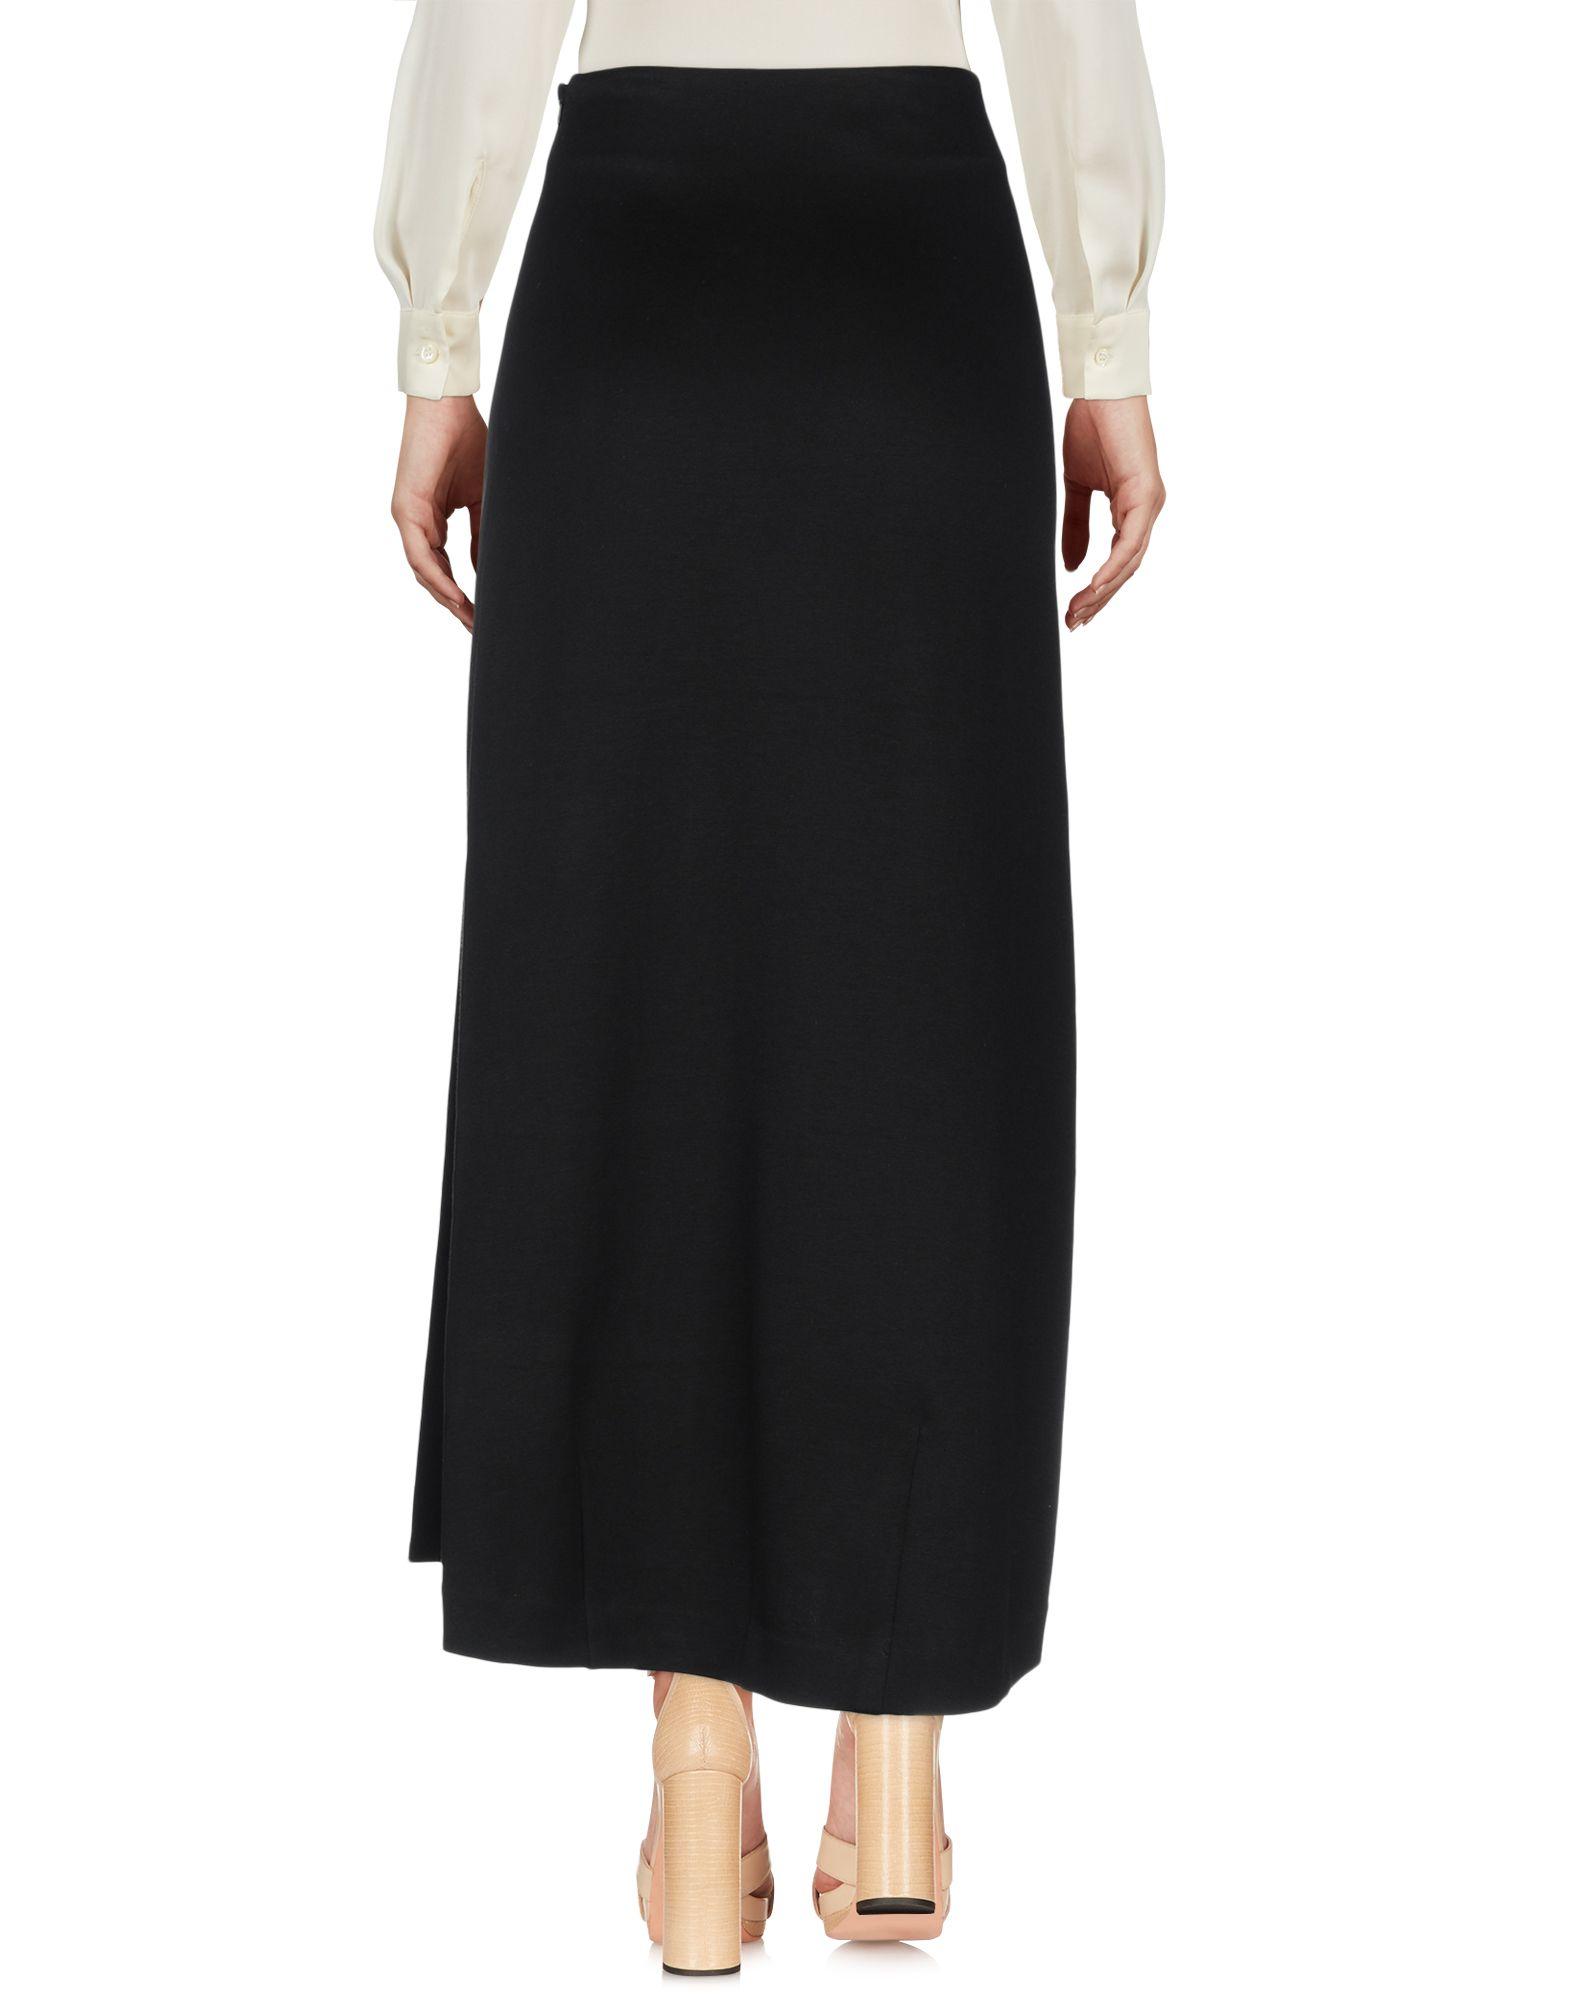 Y-3 Synthetic 3/4 Length Skirt in Black - Lyst